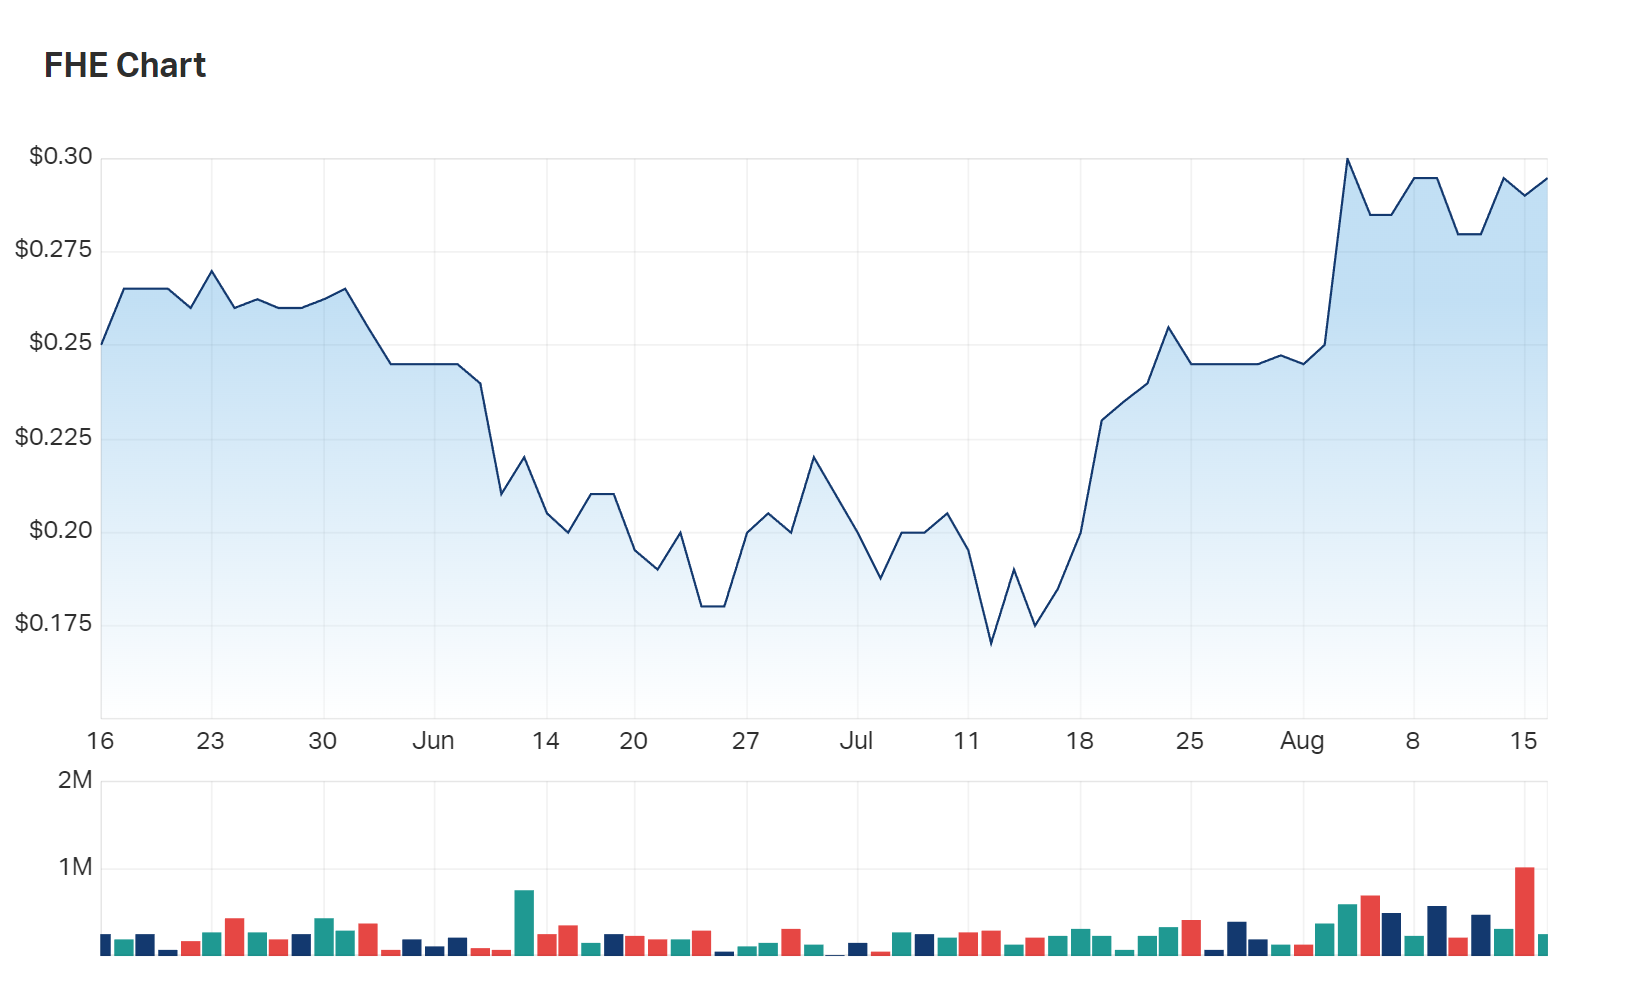 Frontier's three month charts make clear a growth in interest from investors over the last weeks and months 